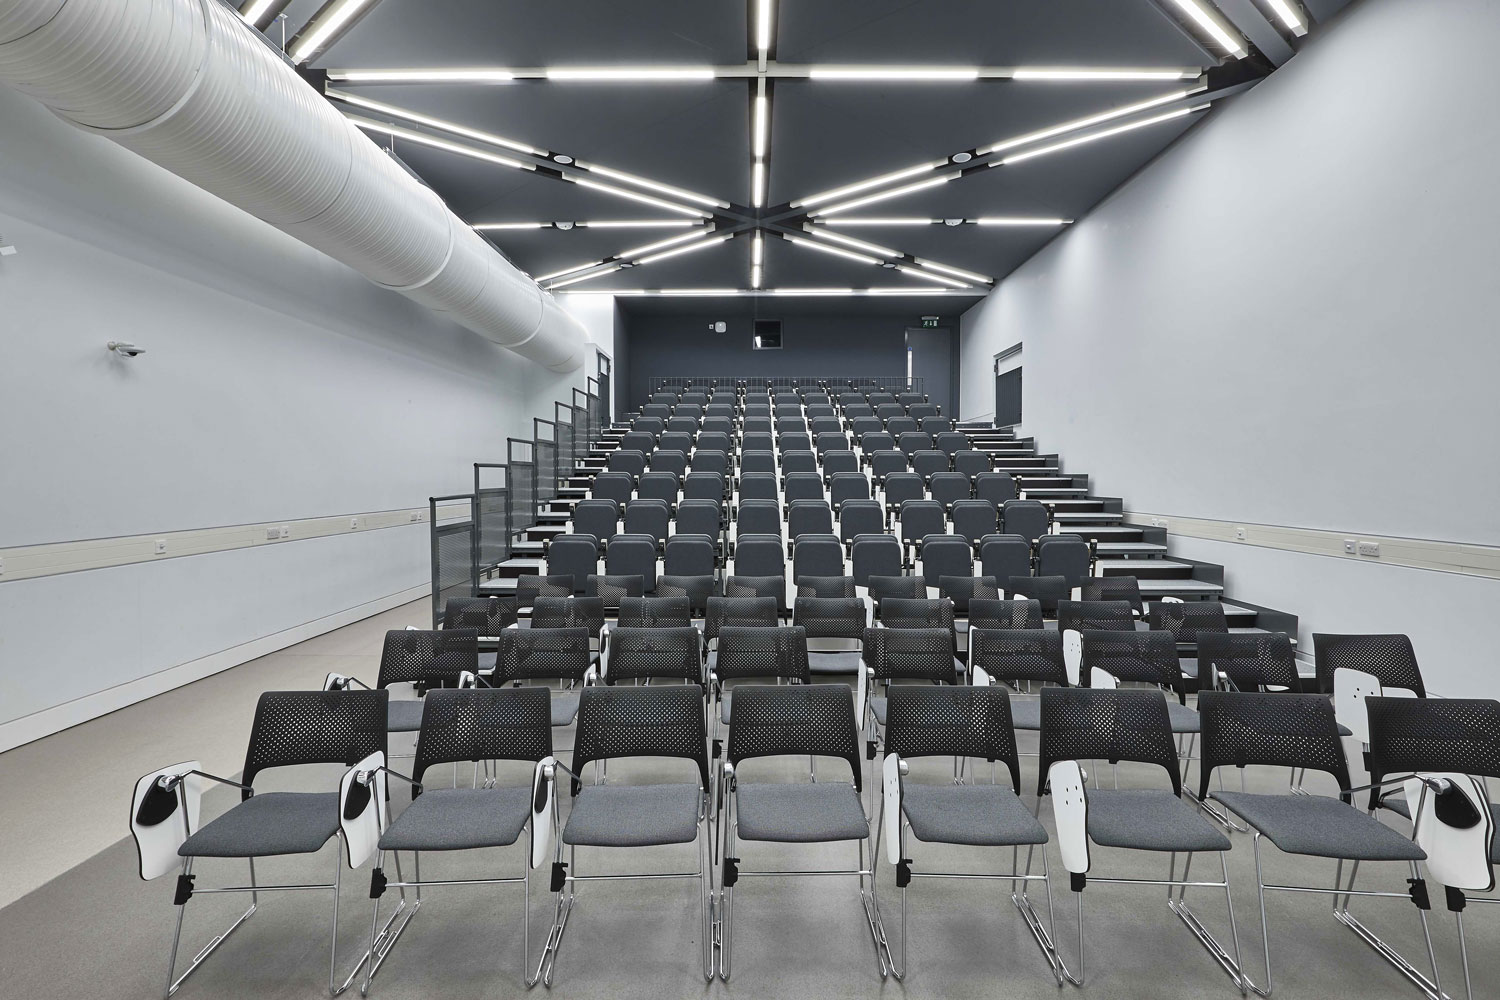 School of Art Lecture Theatre, Southampton University, Winchester | Architectural Installation Photography